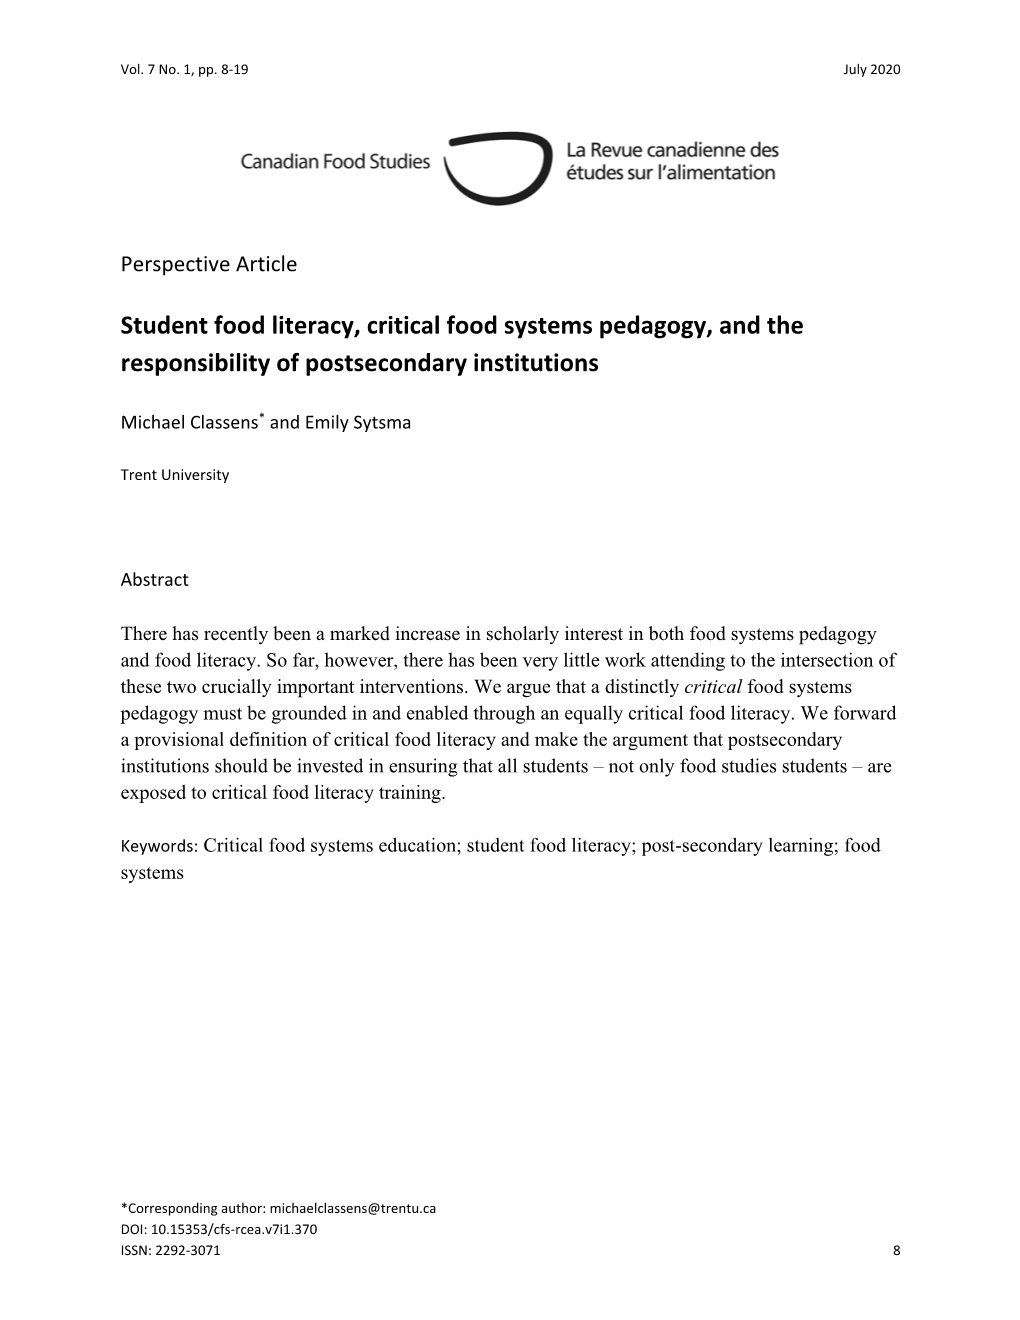 Student Food Literacy, Critical Food Systems Pedagogy, and the Responsibility of Postsecondary Institutions